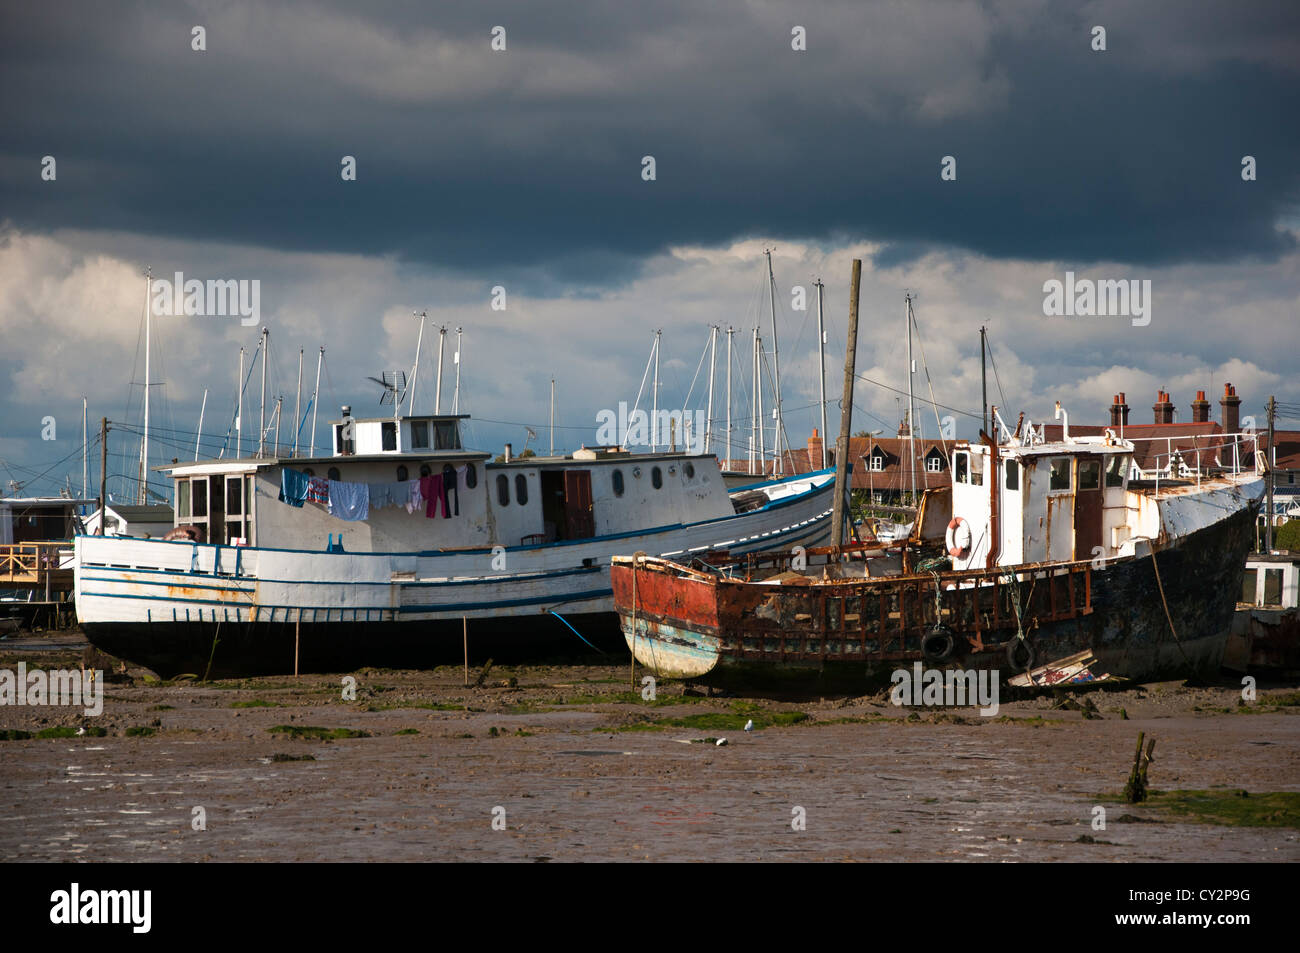 Alte Boote Angeln Boote Blackwater River West Mersea Stockfoto